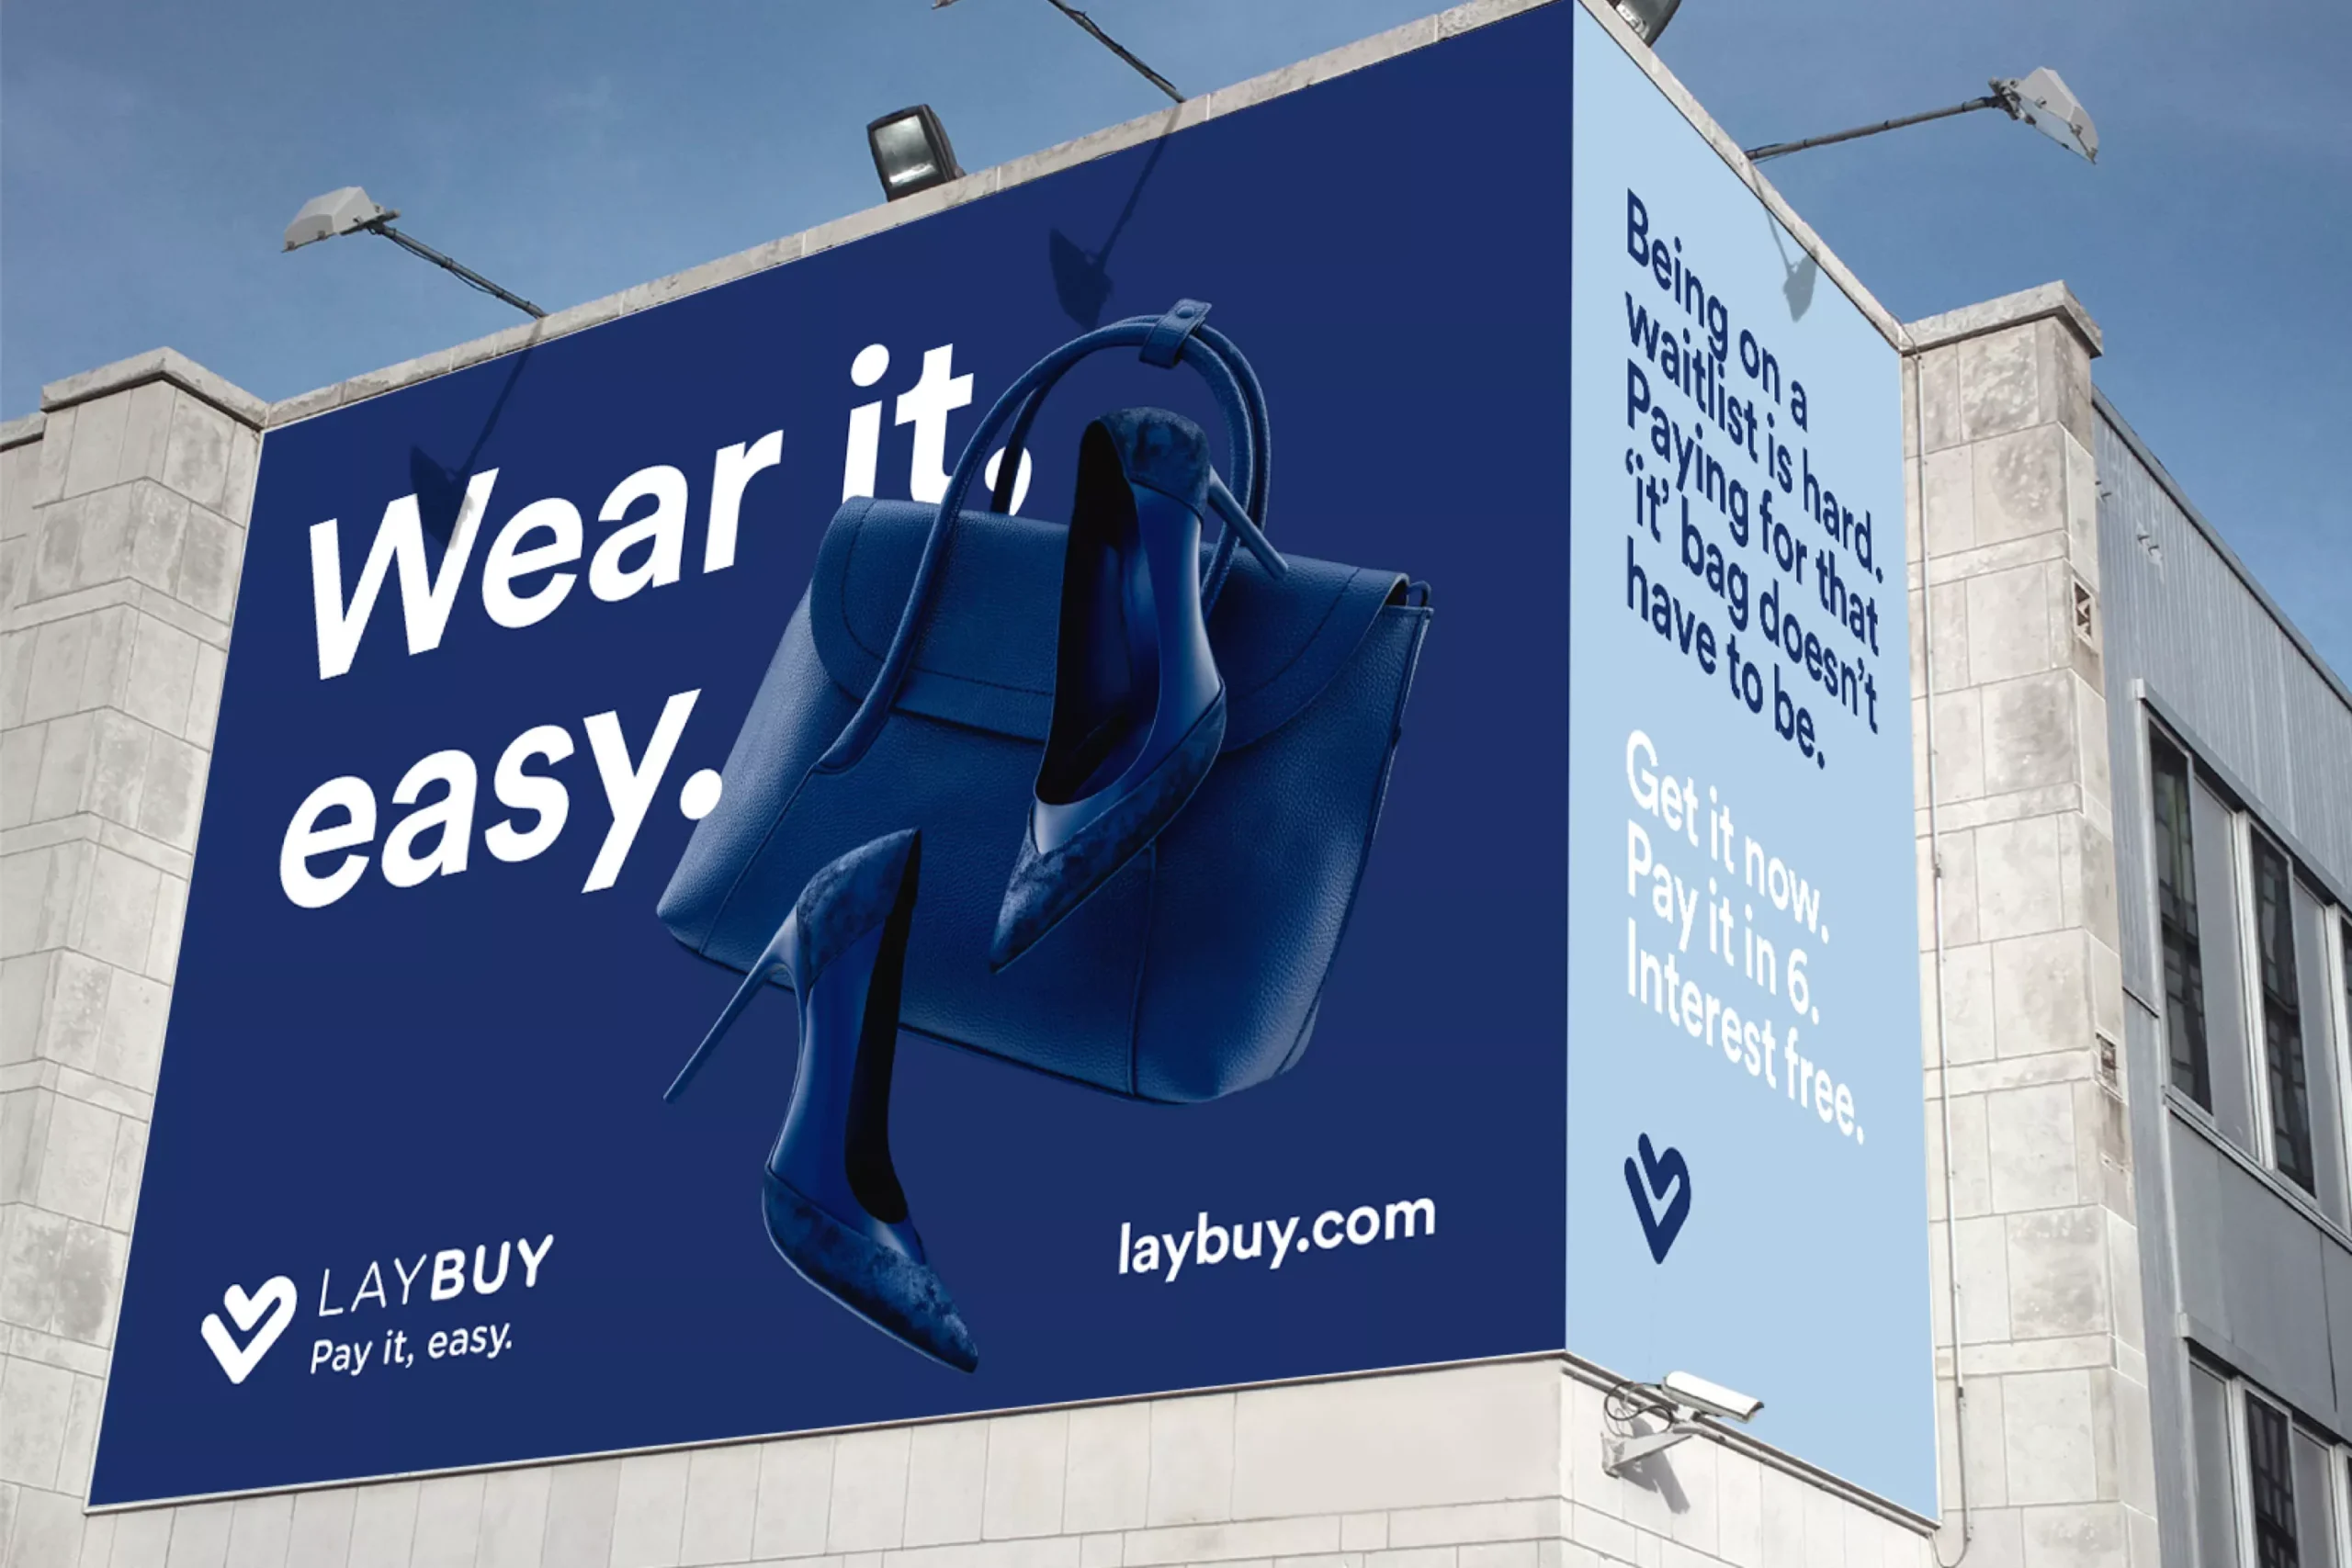 kanook-studio-laybuy-pay-it-easy-campaign12